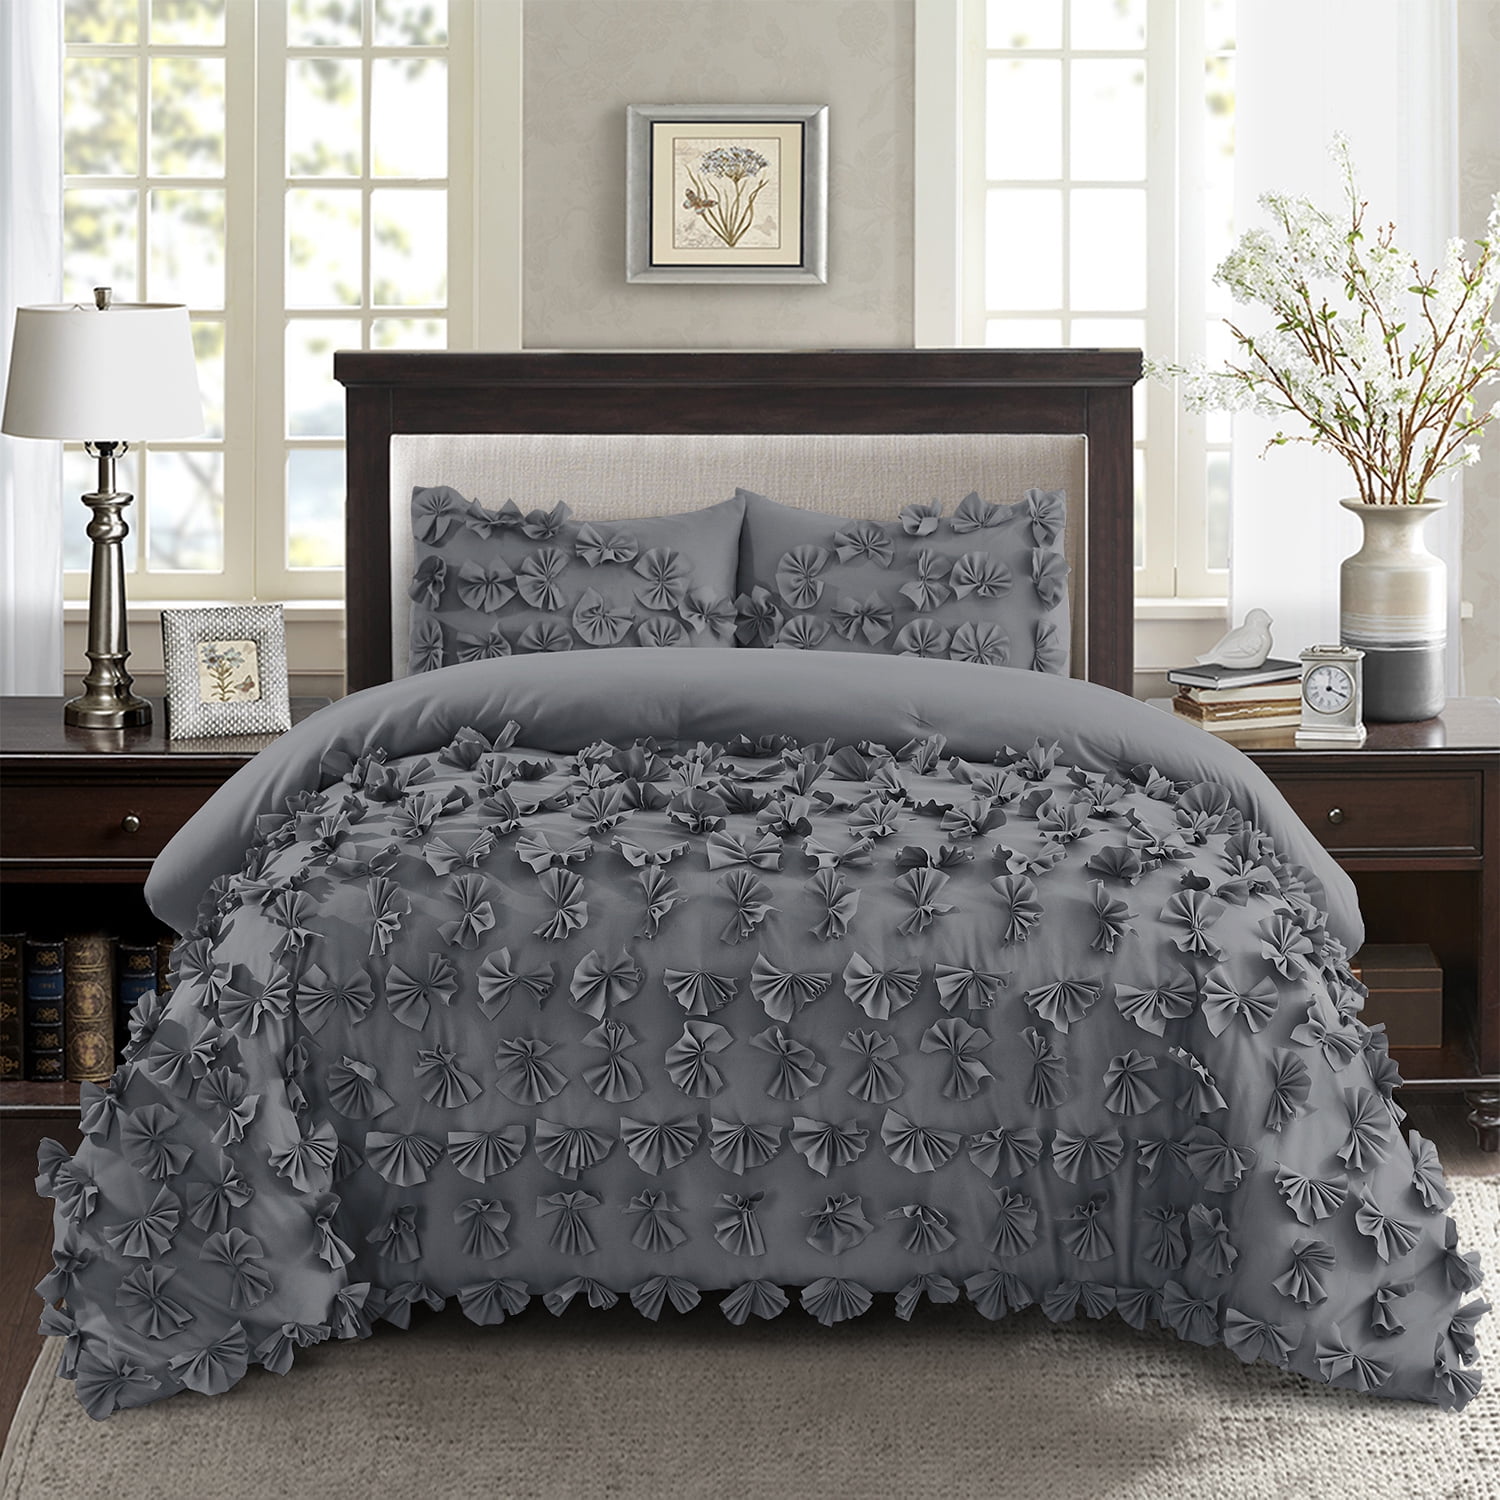 Details about   Quilted Bedspread Ruffles Pillowcase Cotton Quilted Bedskirt Luxury Princess